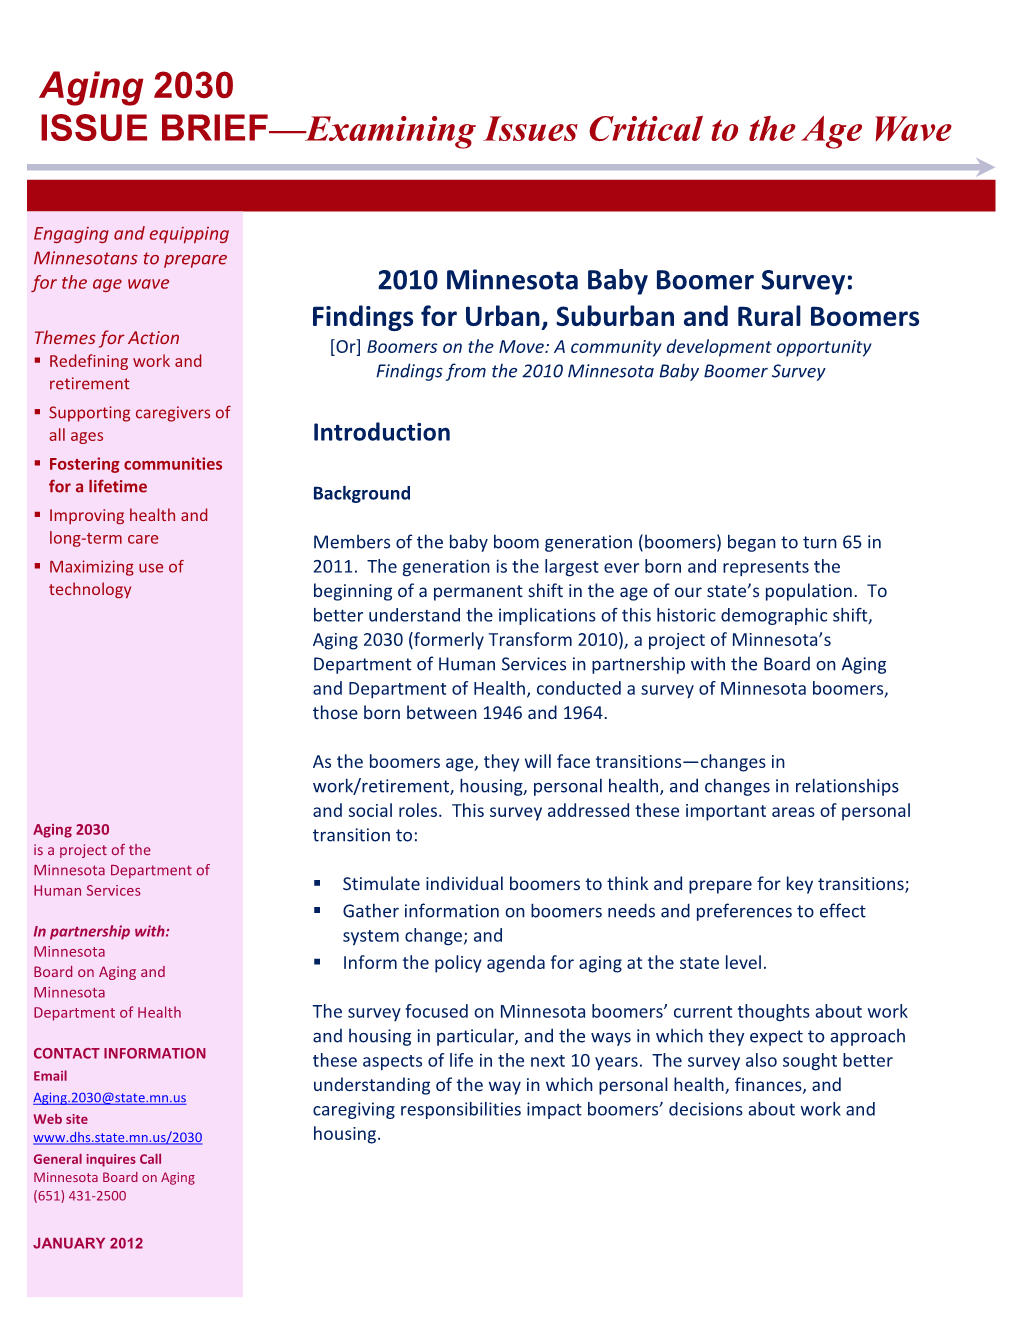 2010 Minnesota Baby Boomer Survey: Findings for Urban, Suburban and Rural Boomers Themes for Action [Or] Boomers on the Move: a Community Development Opportunity